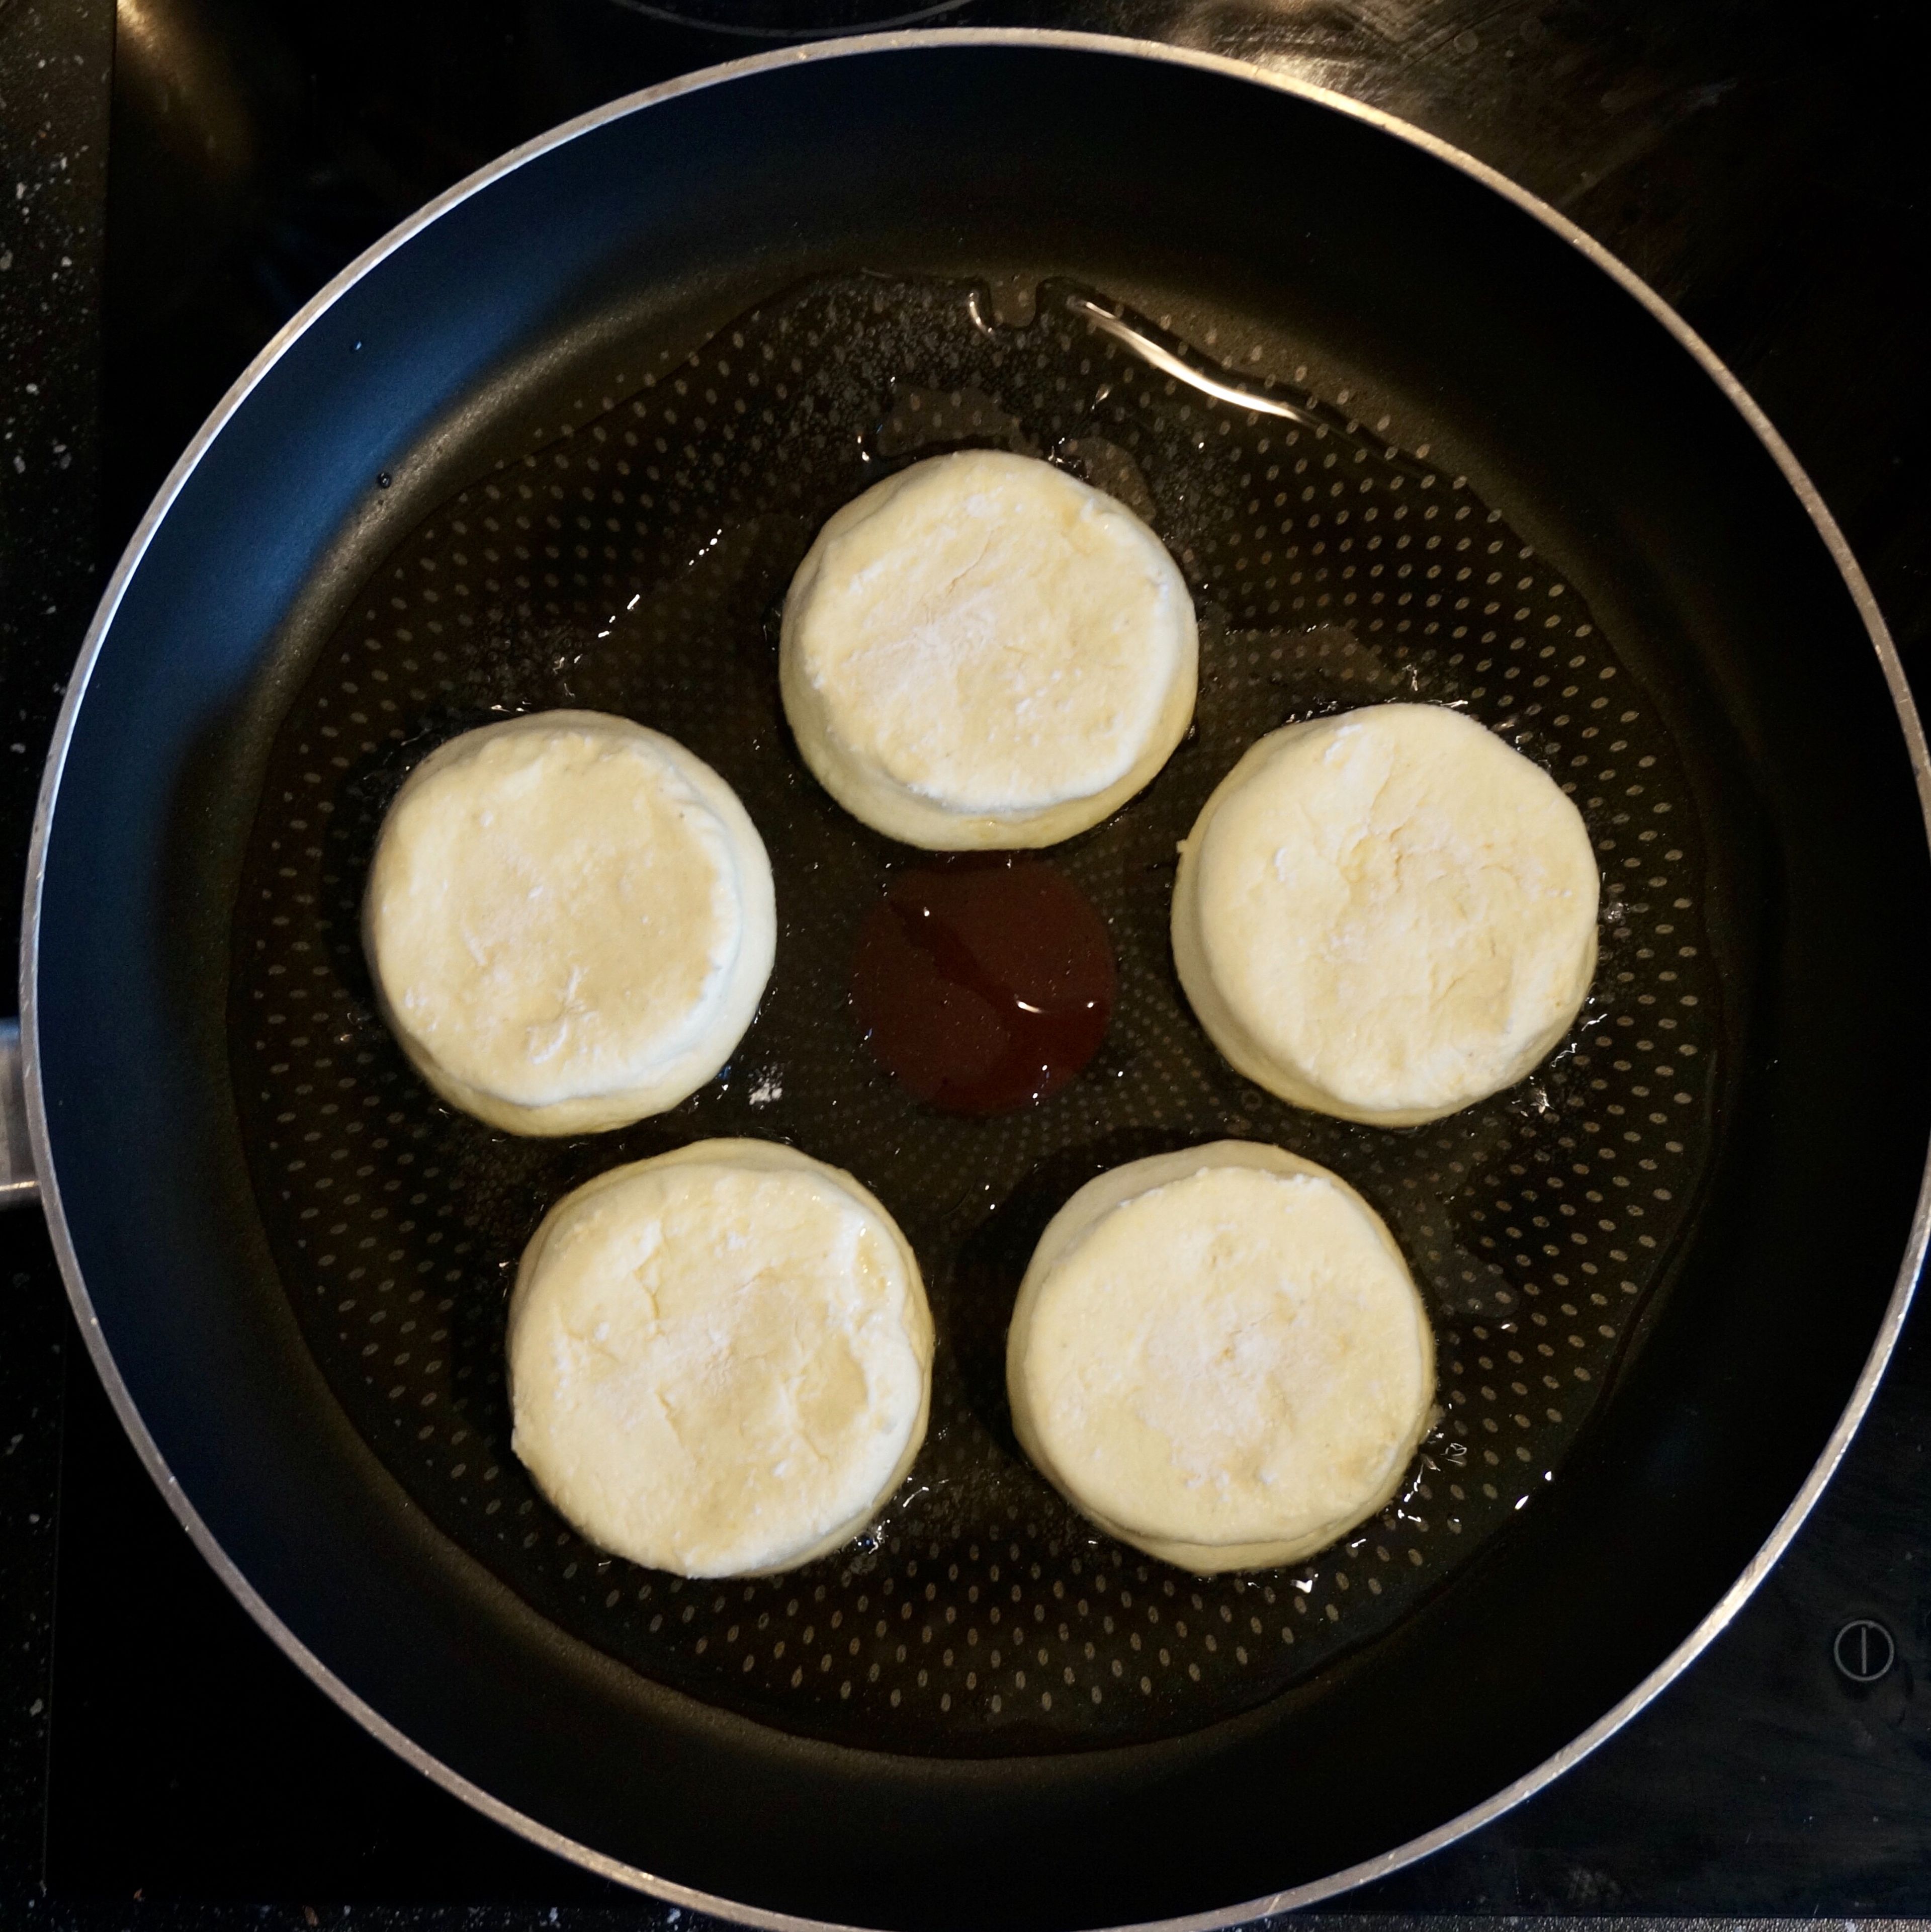 Add some oil to a preheated pan, put the “hockey pucks”. Fry them first on one side, then gently turn over and fry the other side, reduce heat and cover.